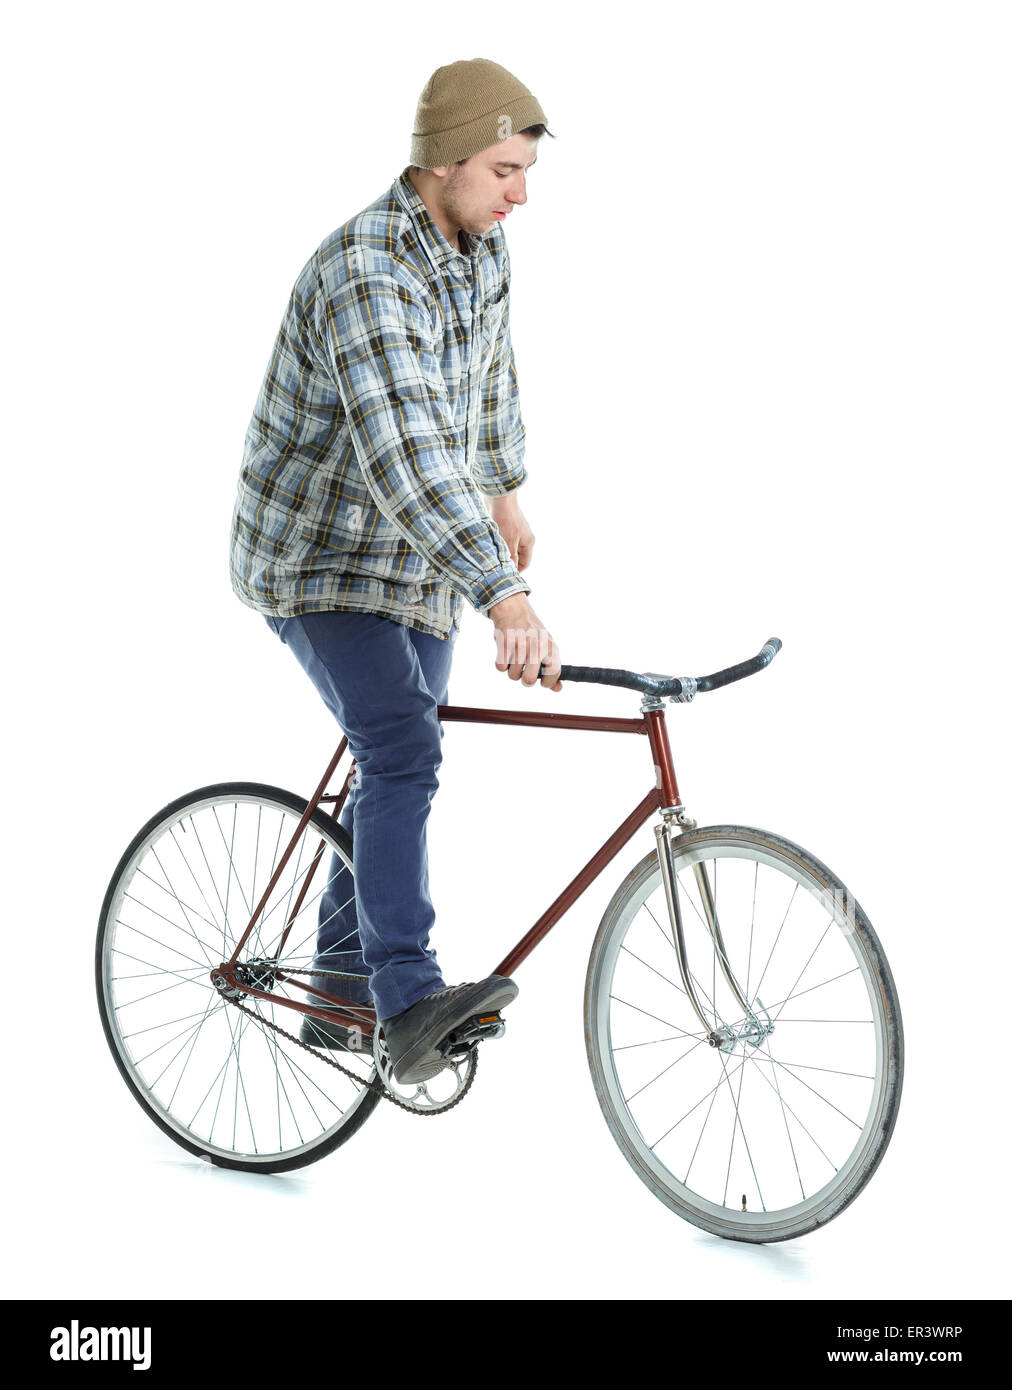 Young man doing tricks on fixed gear bicycle on a white background Stock Photo